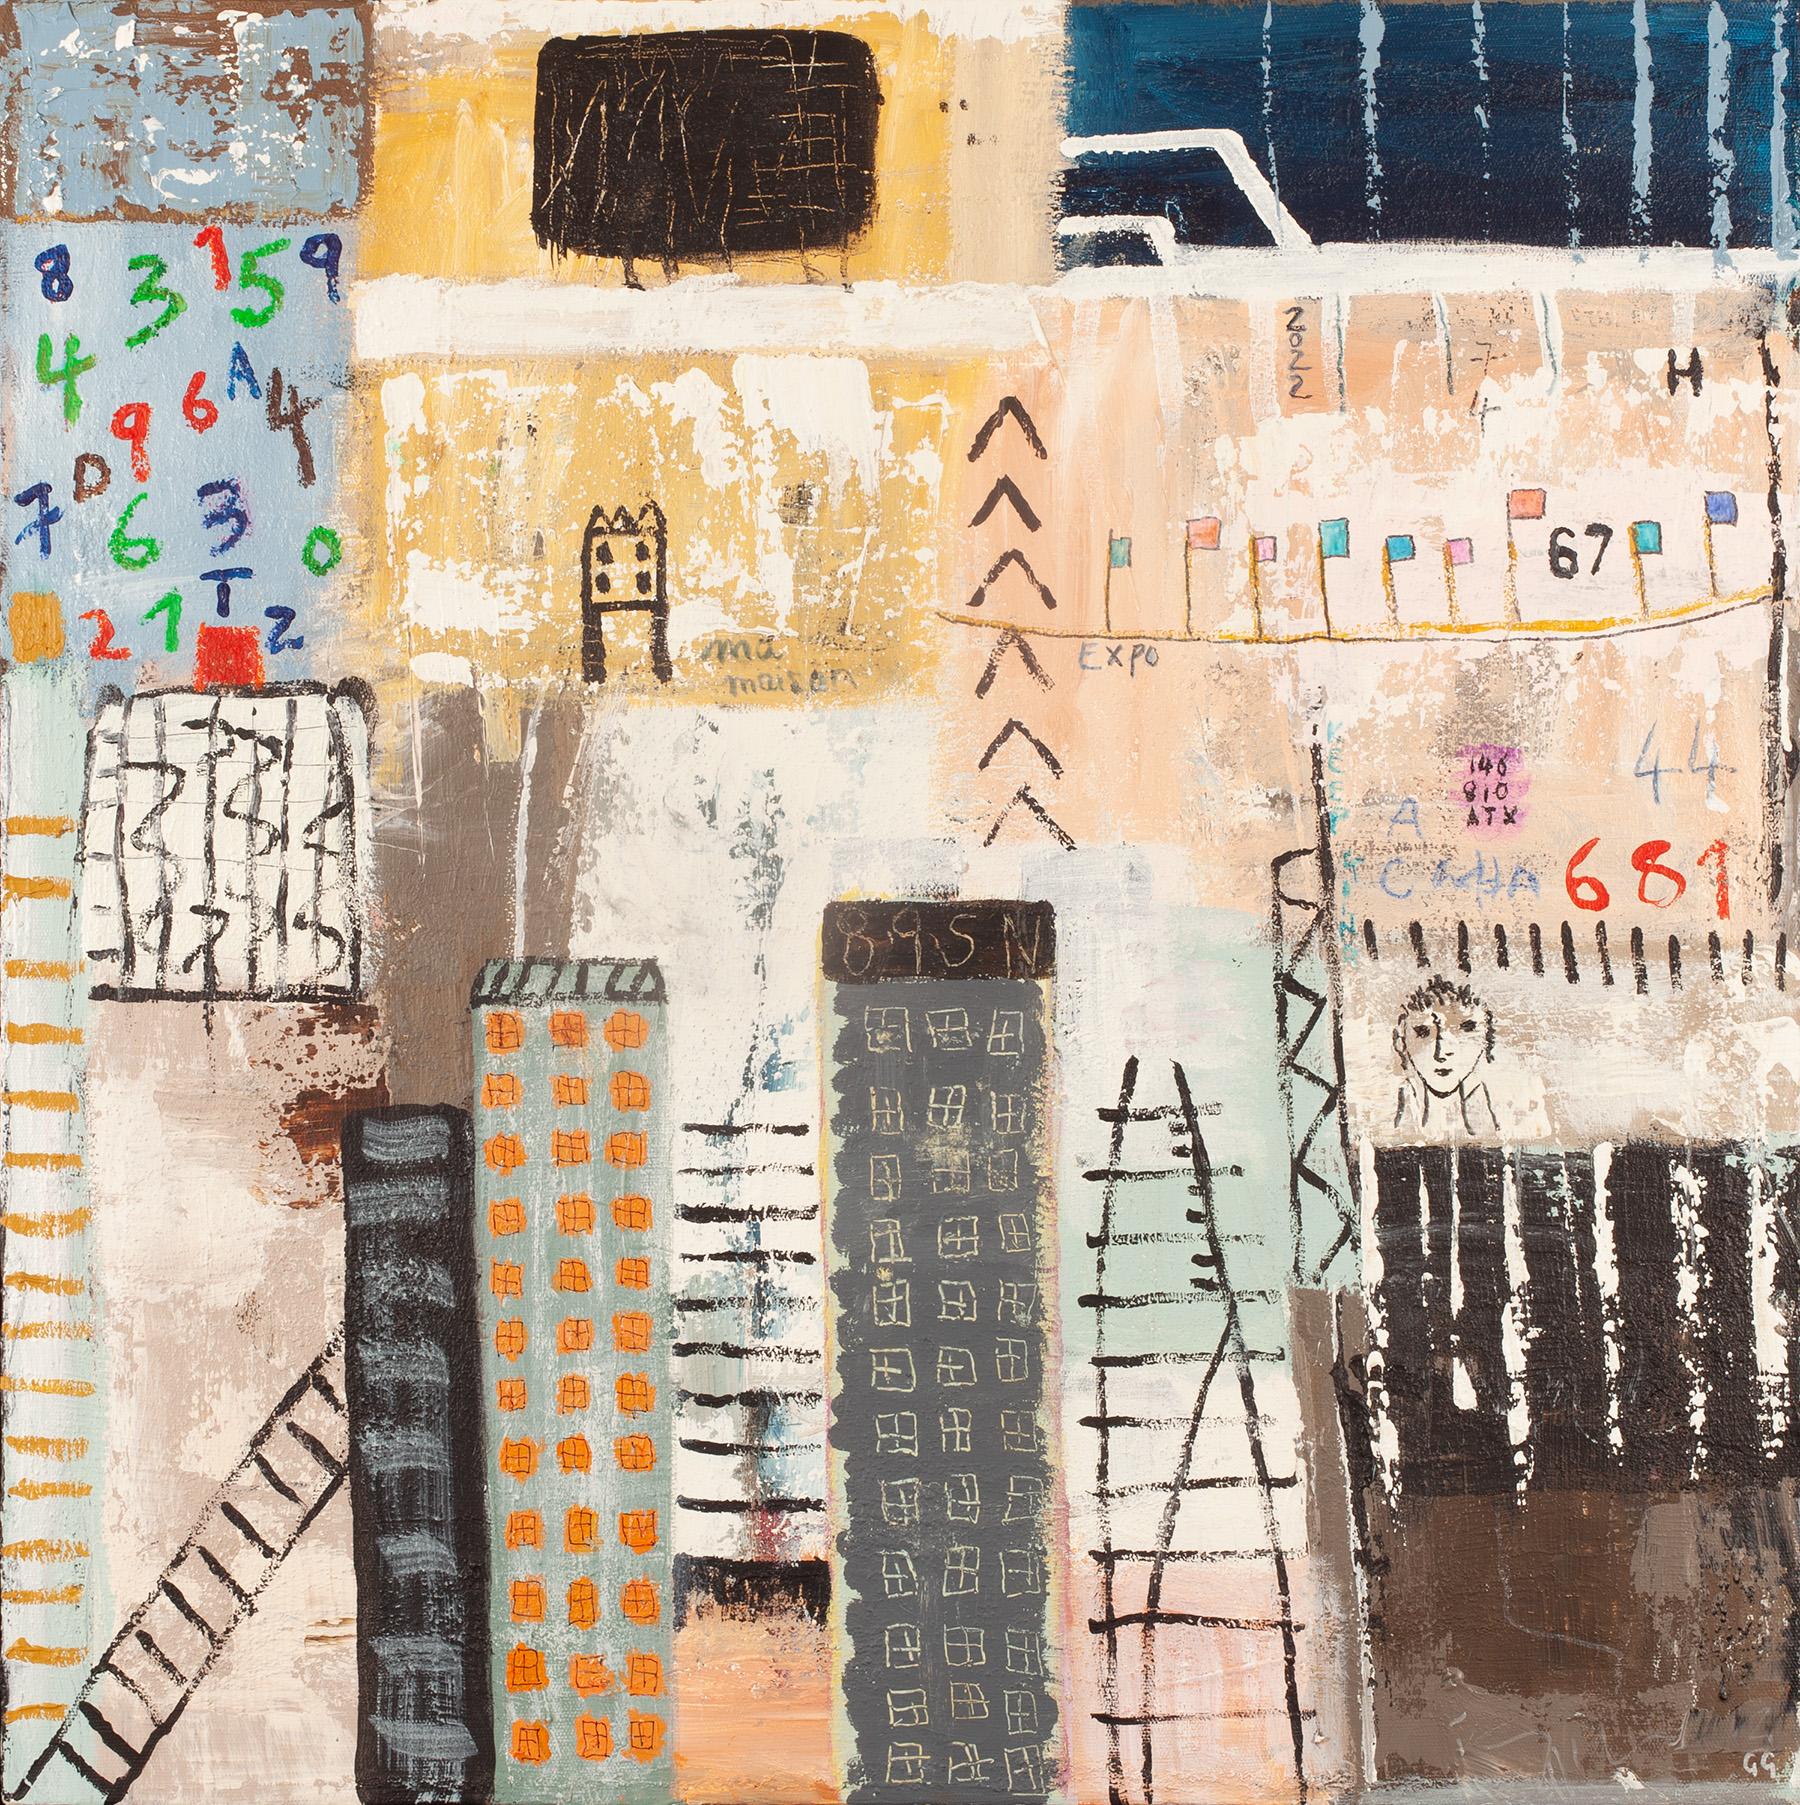 Urban Scape - Colourful, Playful Figurative City: Mixed Media on Canvas - Mixed Media Art by Gohar Goddard